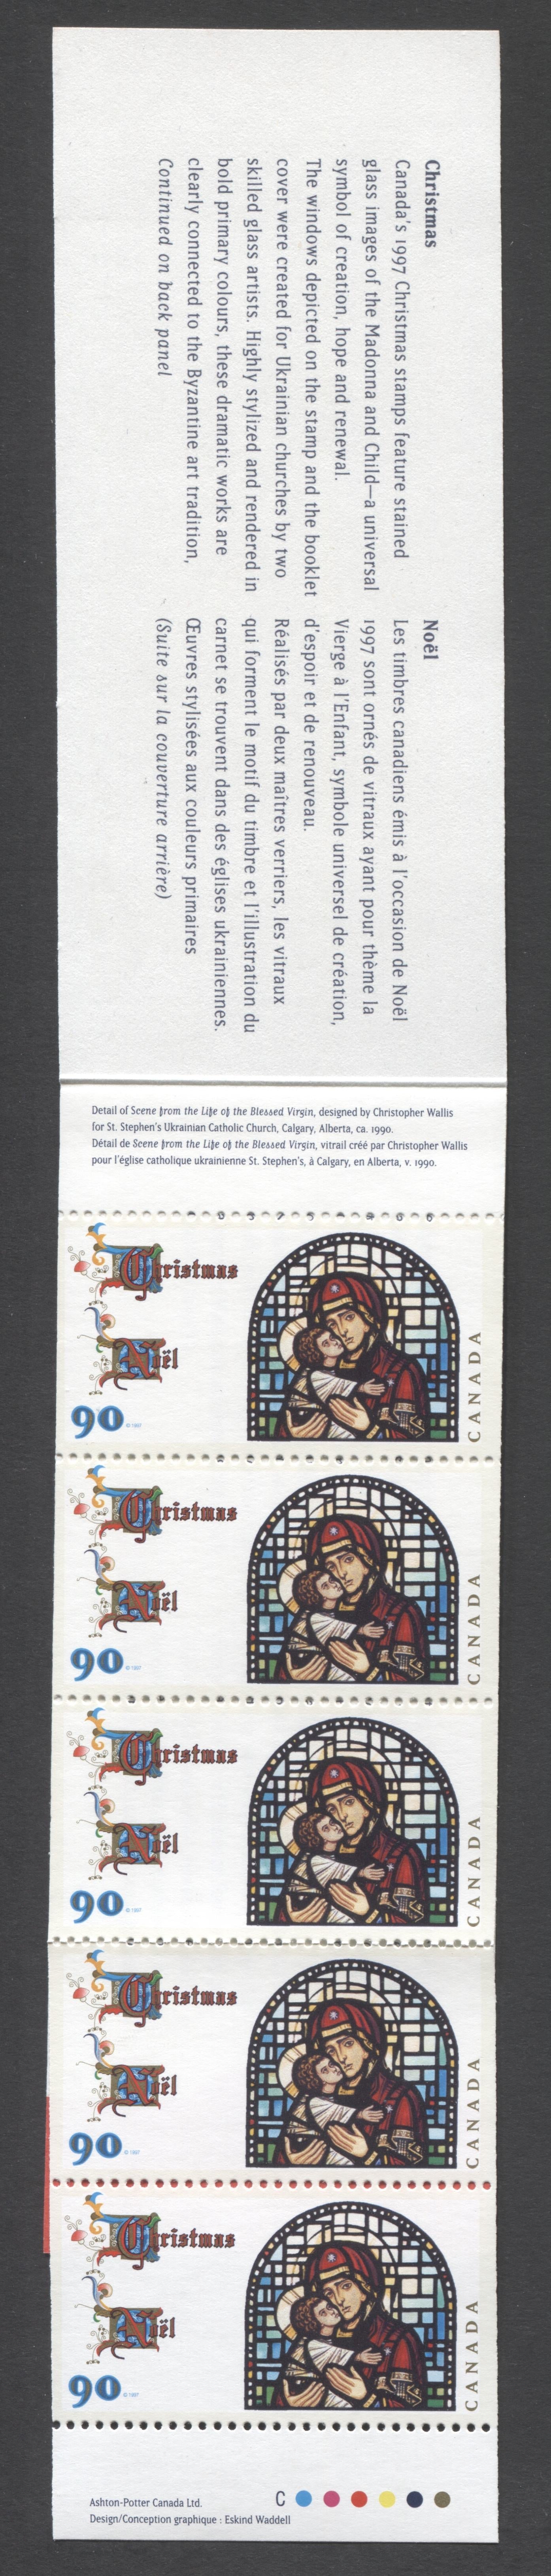 Canada #BK204a-b 1997 Christmas Issue, Complete $4.50 Booklet, Coated Papers Paper, Dead Paper, 4 mm GT-4 Tagging